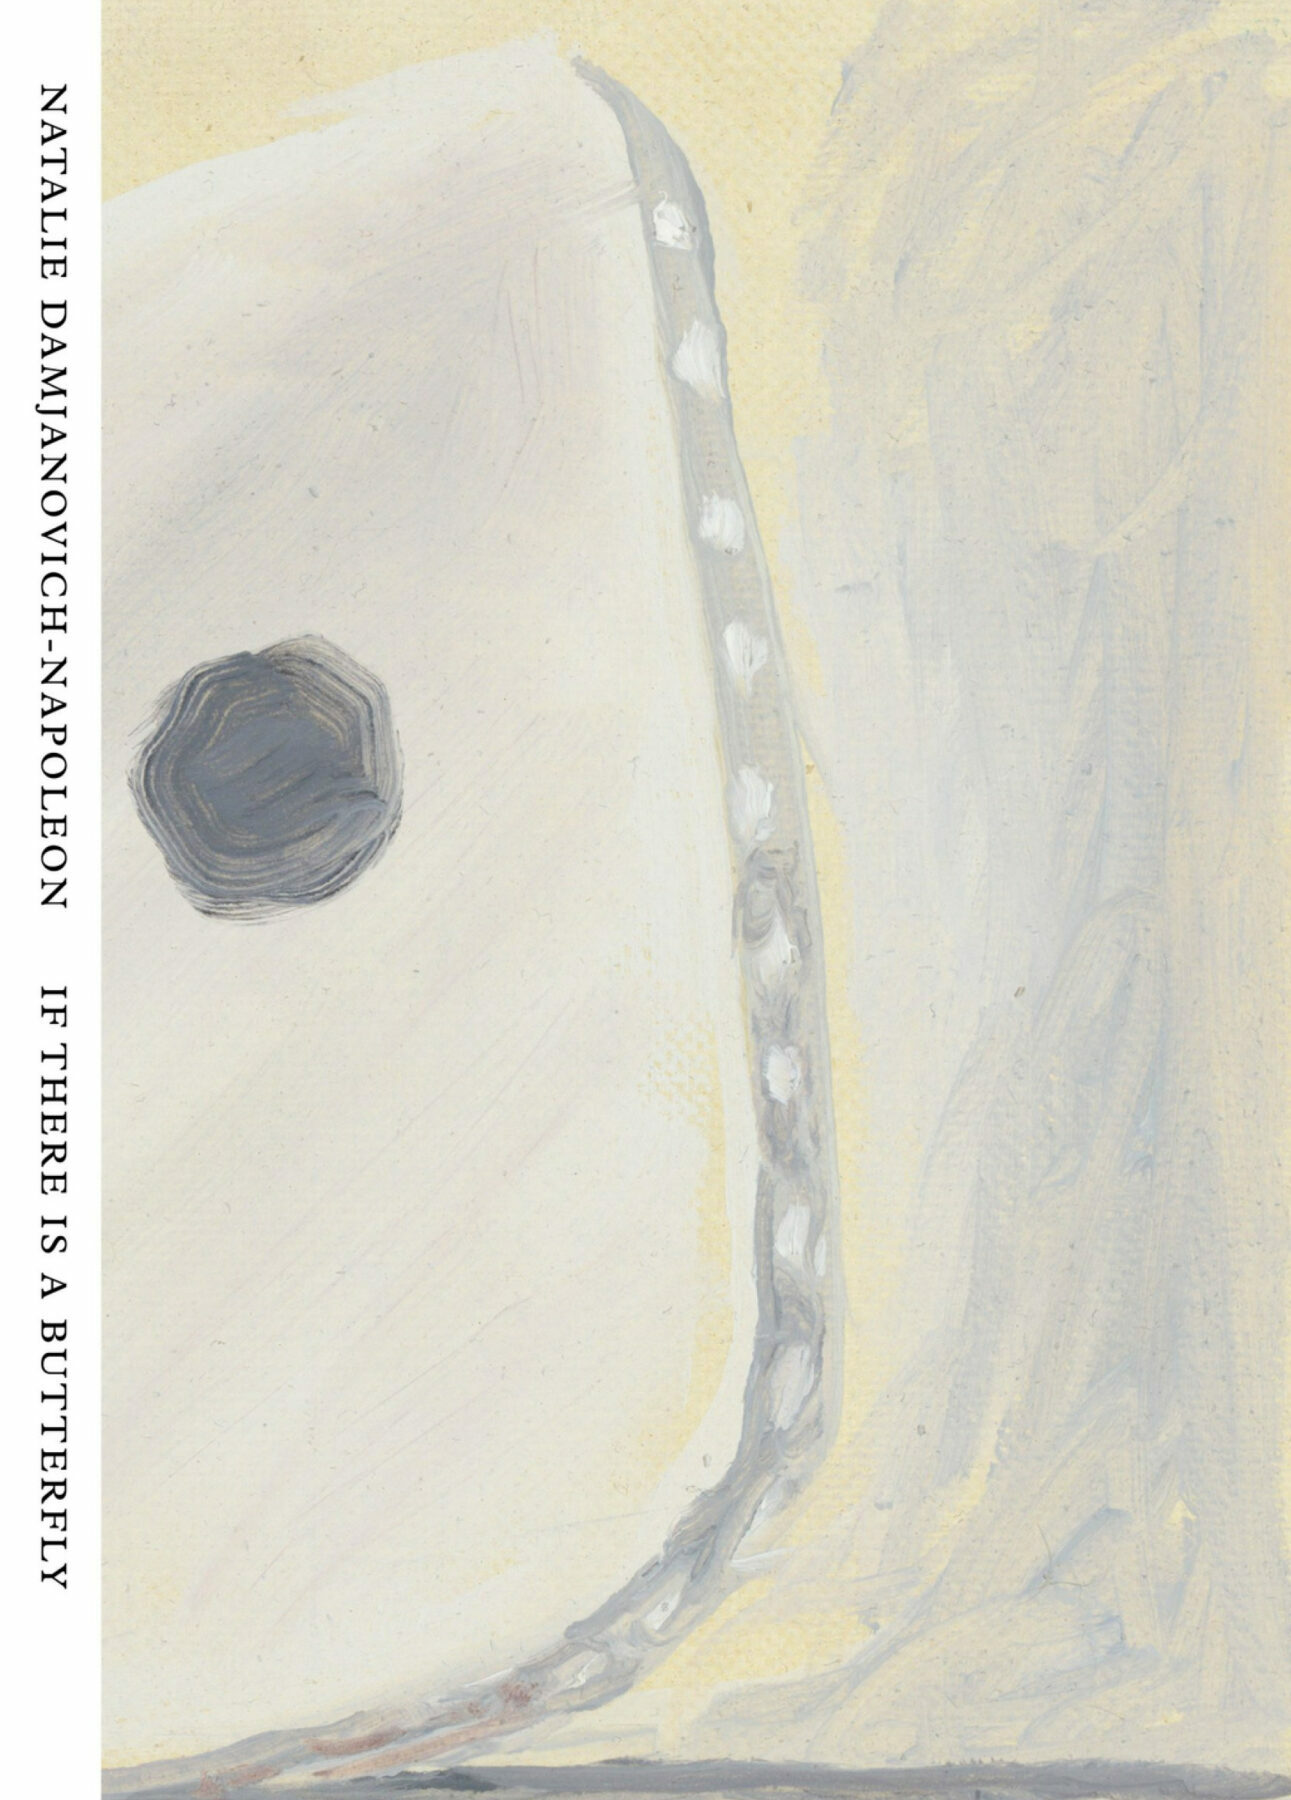 A book cover featuring a gray, black and pale yellow pencil painting. The poet's name and title run down the left-hand side